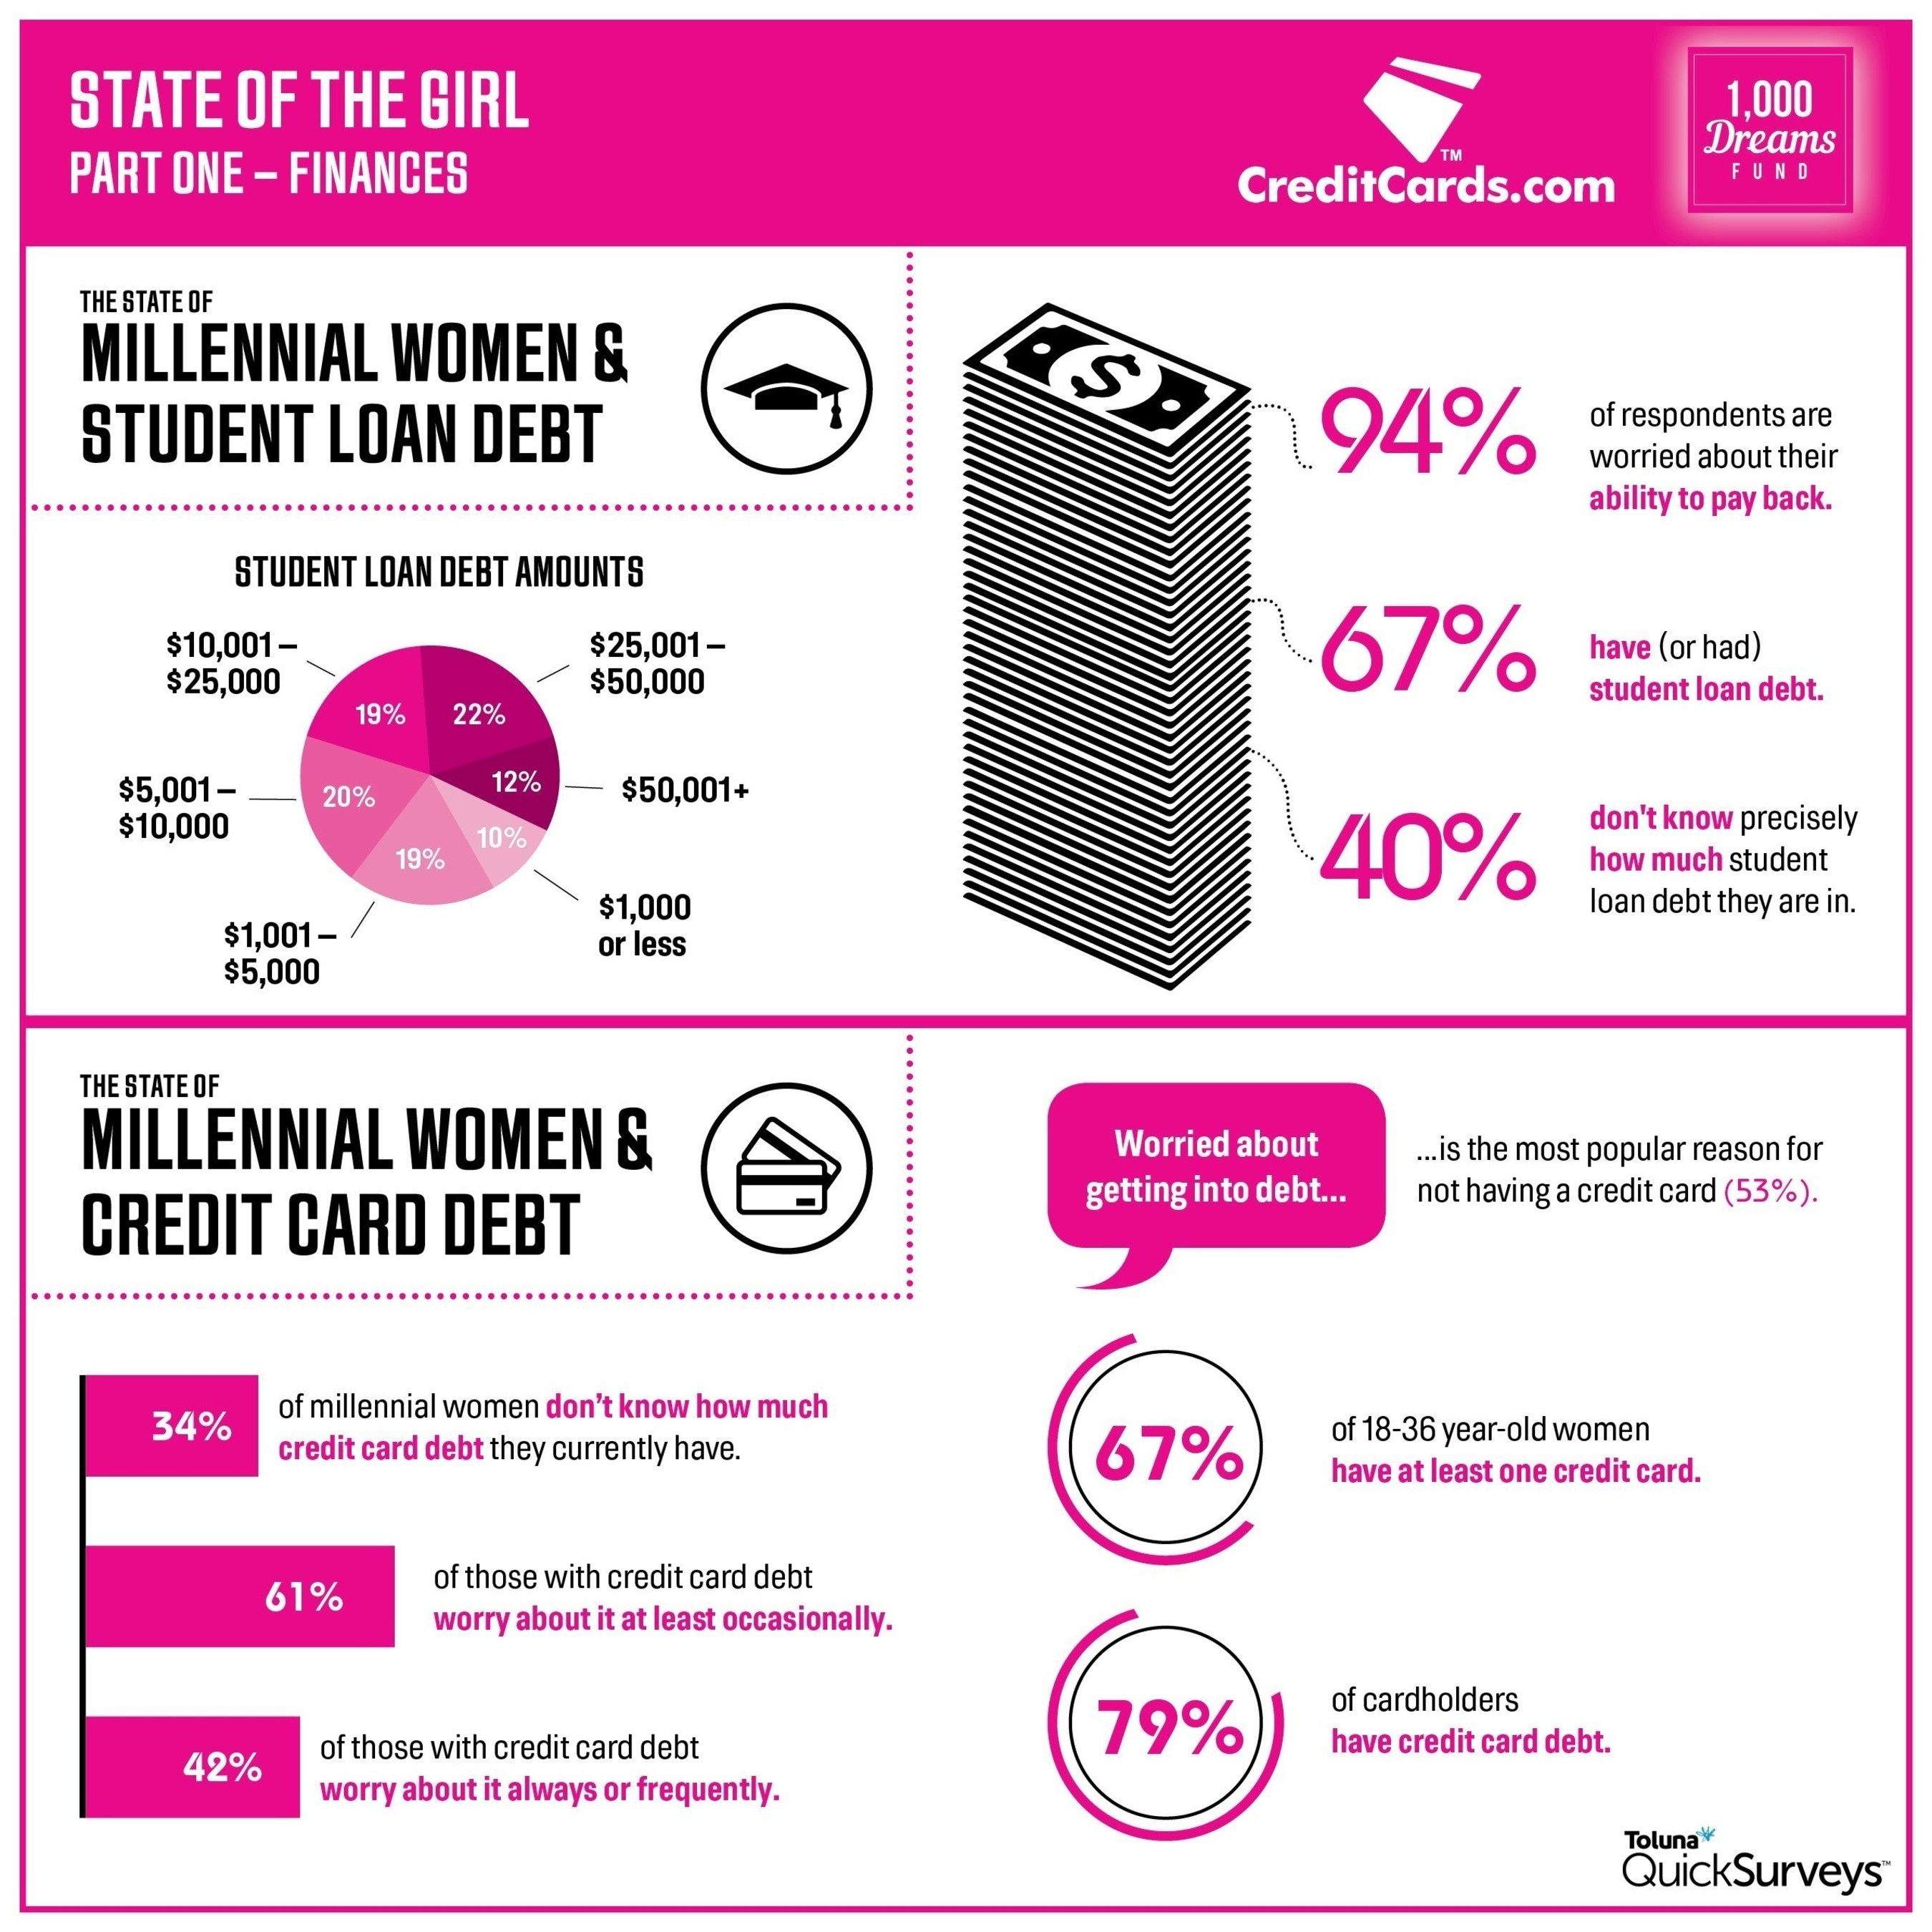 1,000 Dreams Fund and CreditCards.com Partner to Release Survey on American Millennial and Gen Z Women's Finances. Survey Conducted by Toluna Quicksurveys